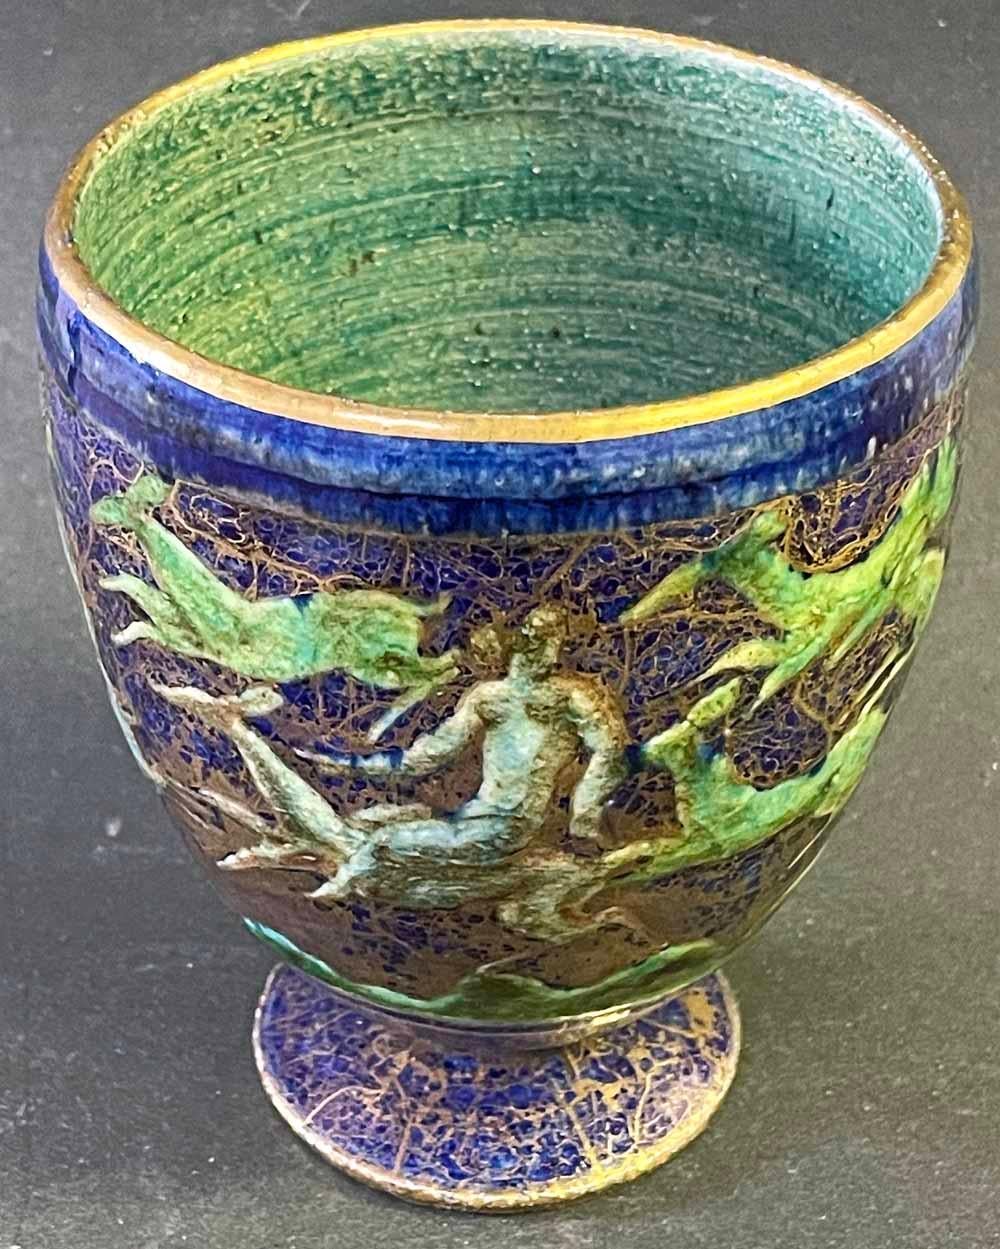 Gorgeously glazed in jewel tones -- sapphire blue, emerald green, and gold -- this footed urn or vase by the great Jean-Leon Mayodon depicts a line of three female nudes riding Art Deco deer, traveling around the surface of the piece and surrounded